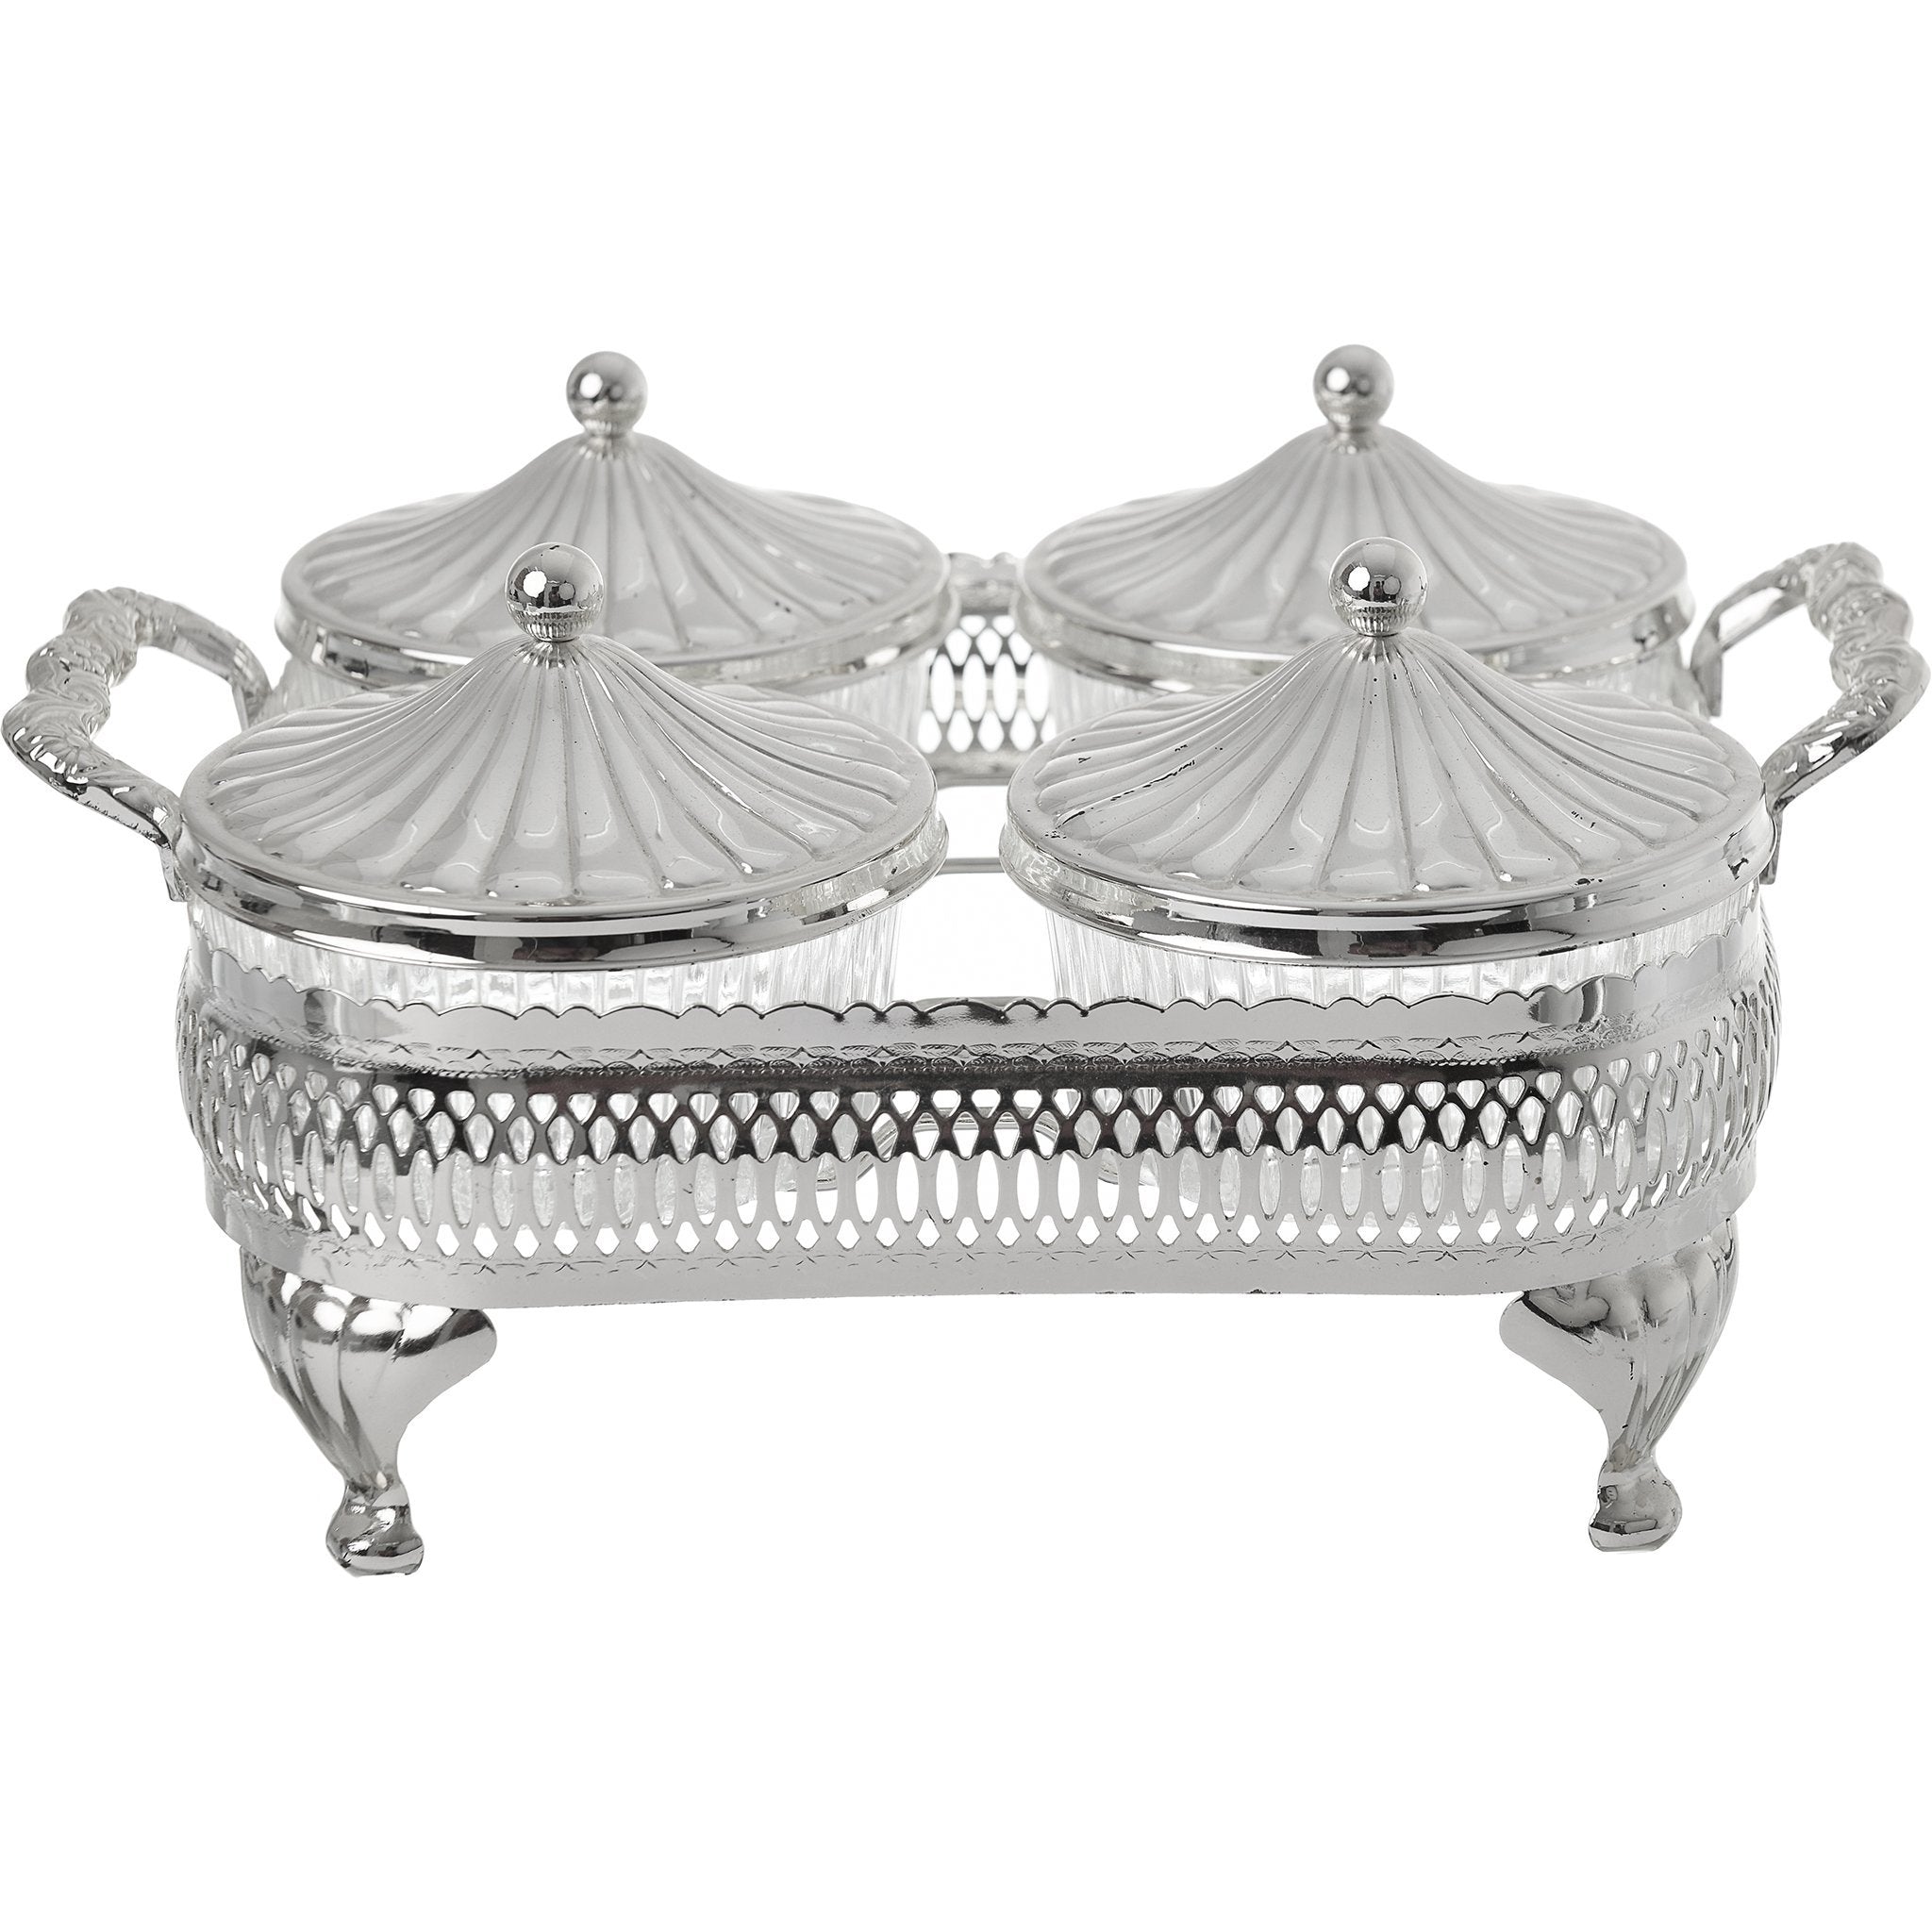 Queen Anne - Round Bowl Set with Silver Plated Stand 4 Pieces - Silver Plated Metal & Glass - 26x21cm - 26000399